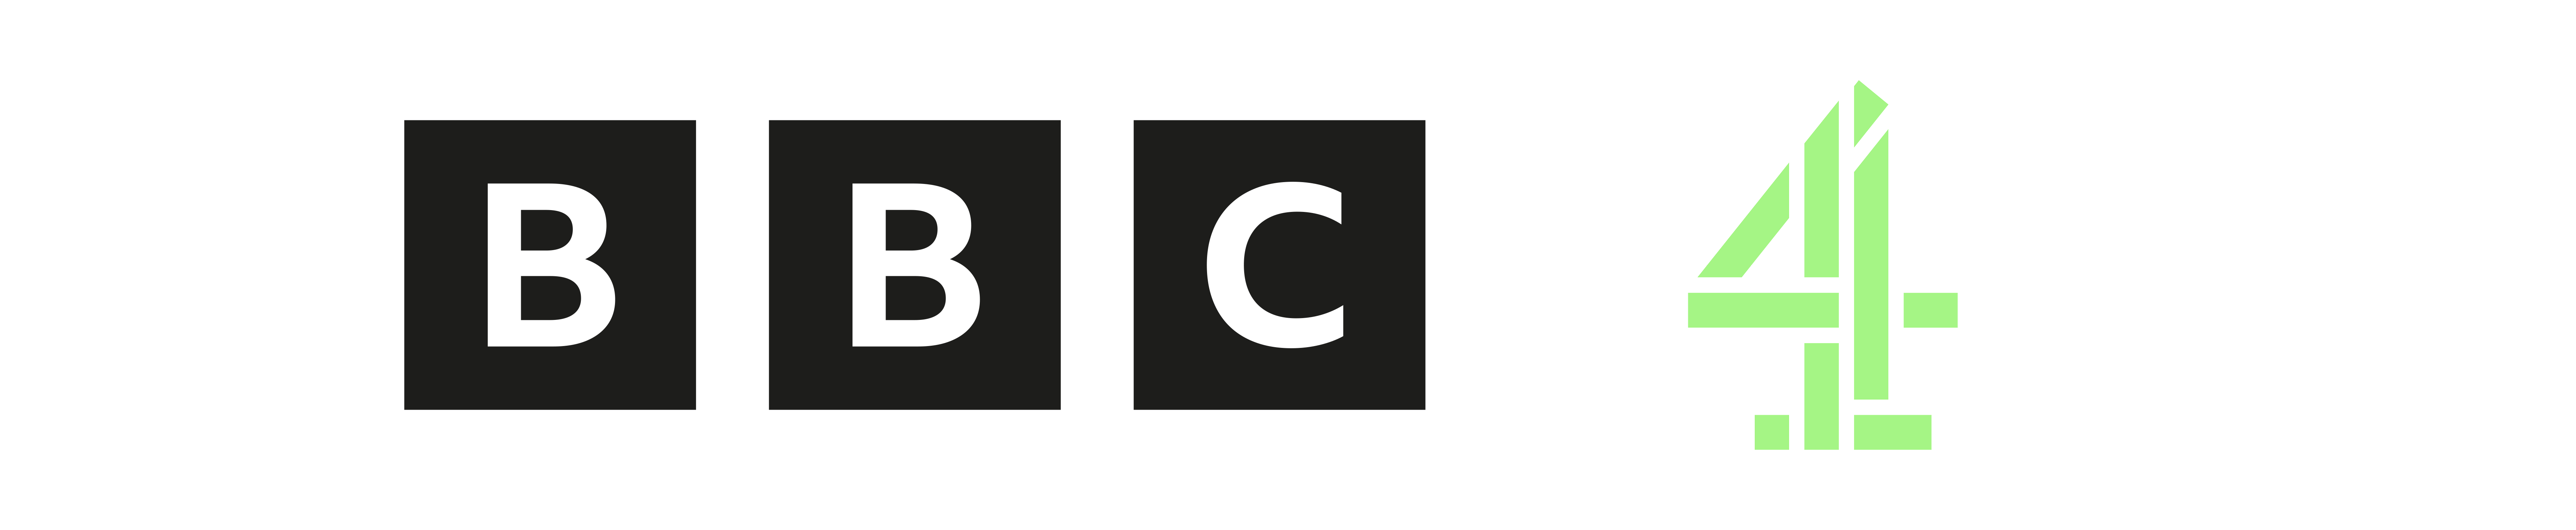 BBC and Channel 4 logos 